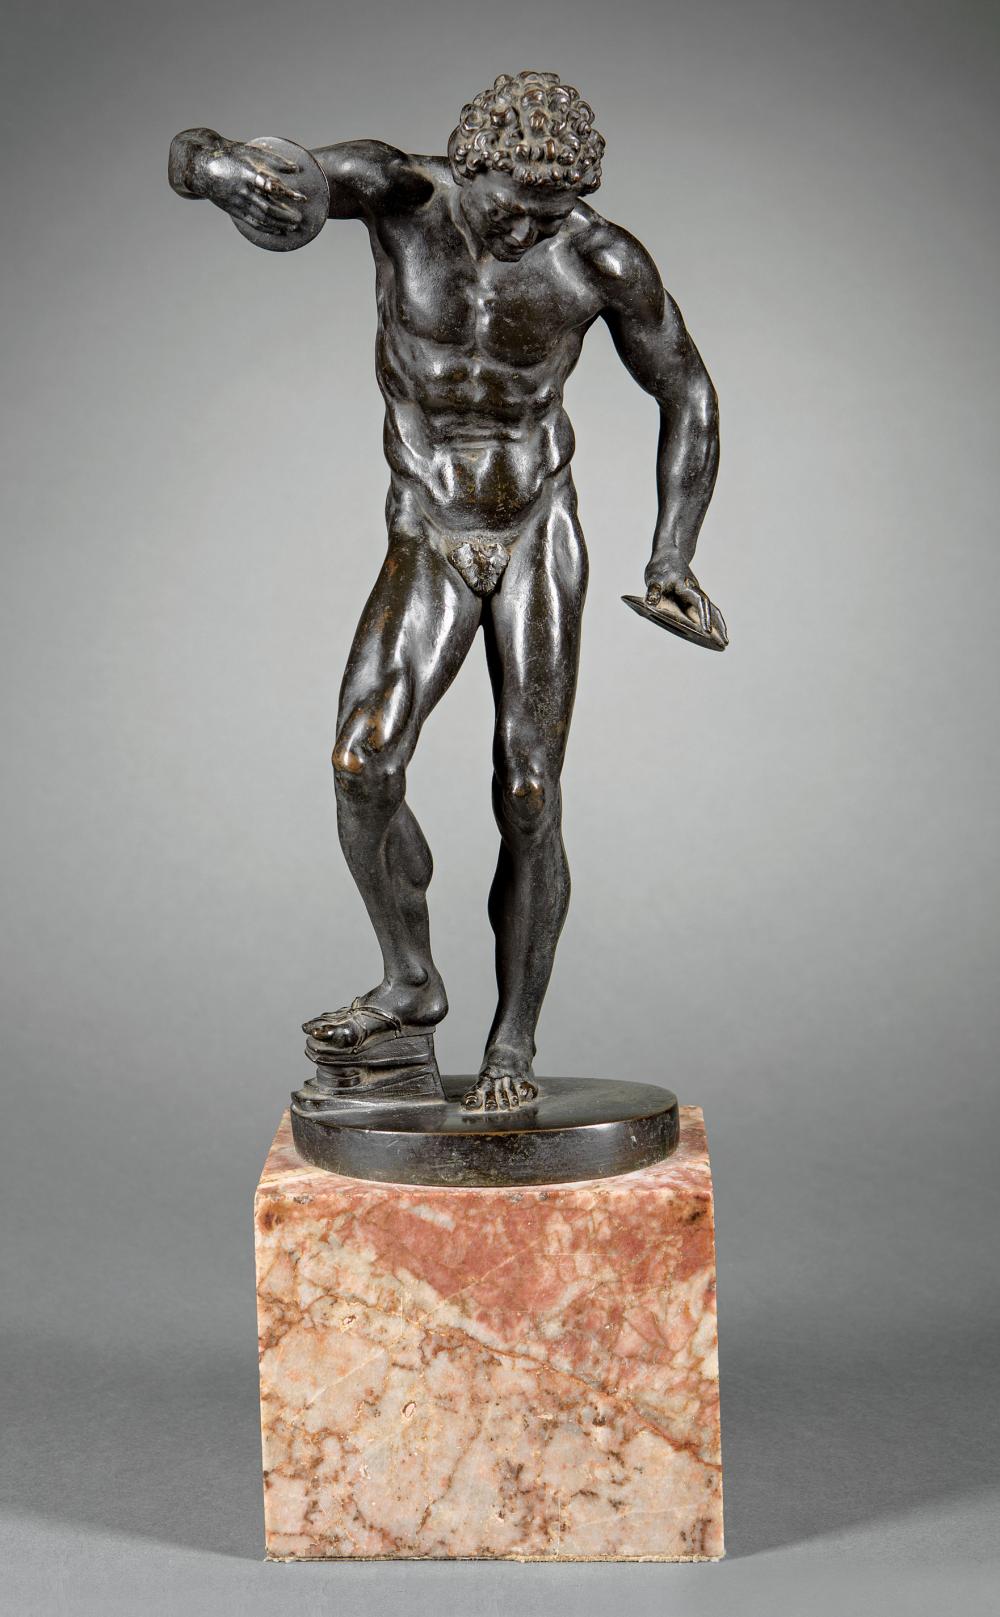 BRONZE FIGURE OF A FAUN PLAYING 31a5c7